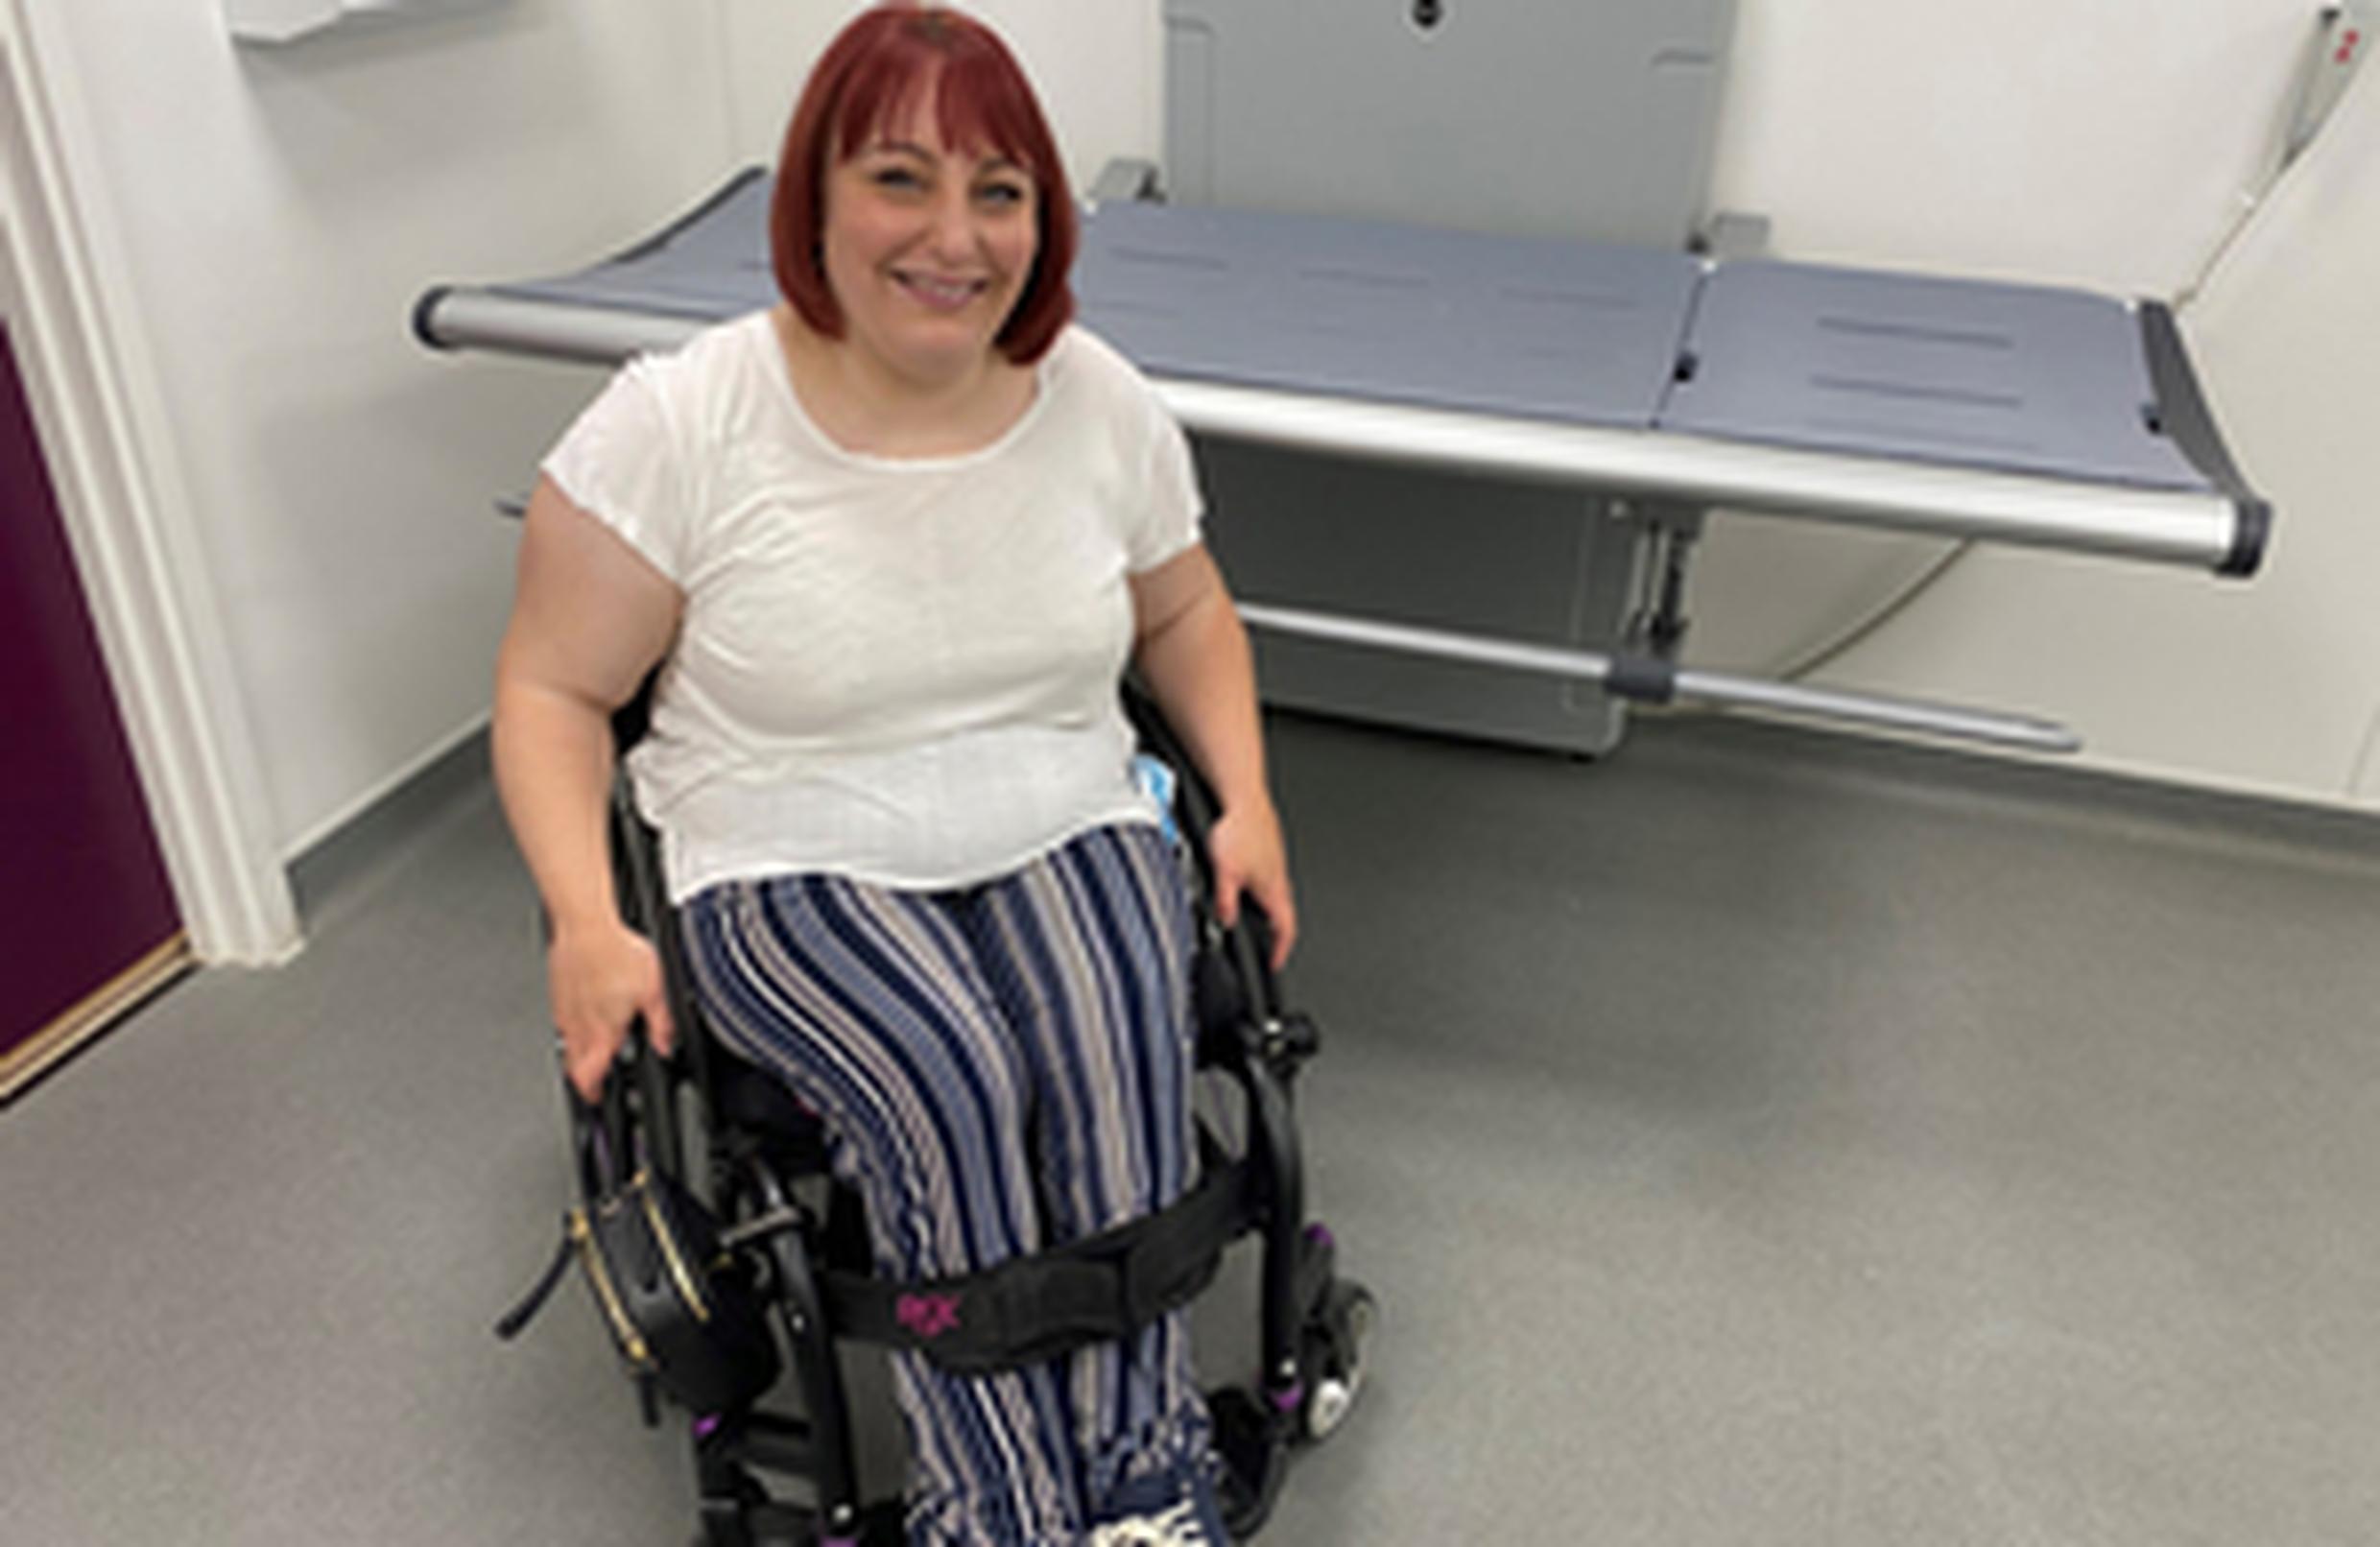 Lucy Wood, also known as ‘The Four-Wheeled Wonder Woman’, visited the Roadchef services in Norton Canes to test out the access guides